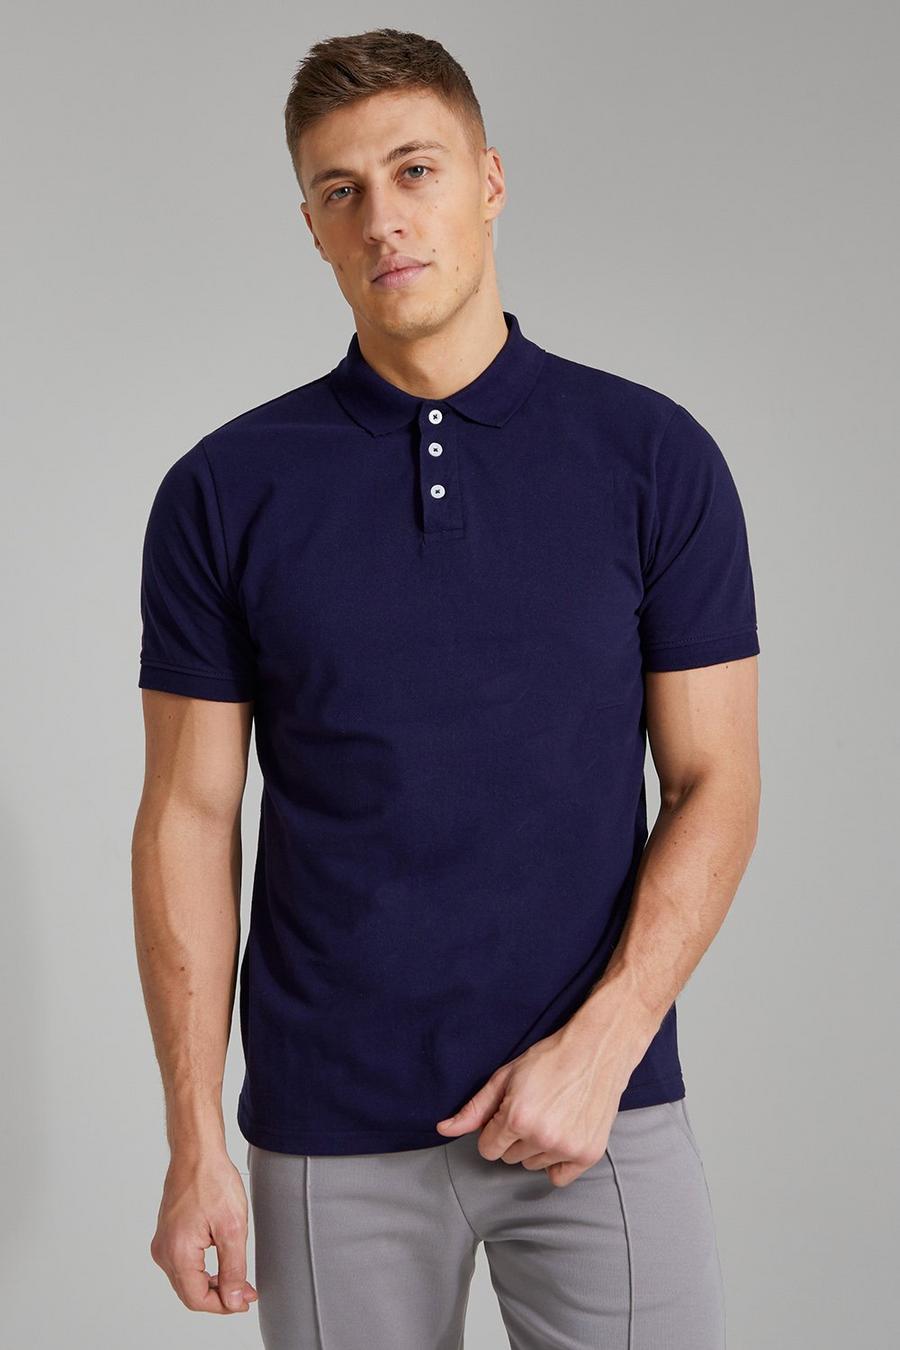 Navy Slim Fit Short Sleeve Pique Polo